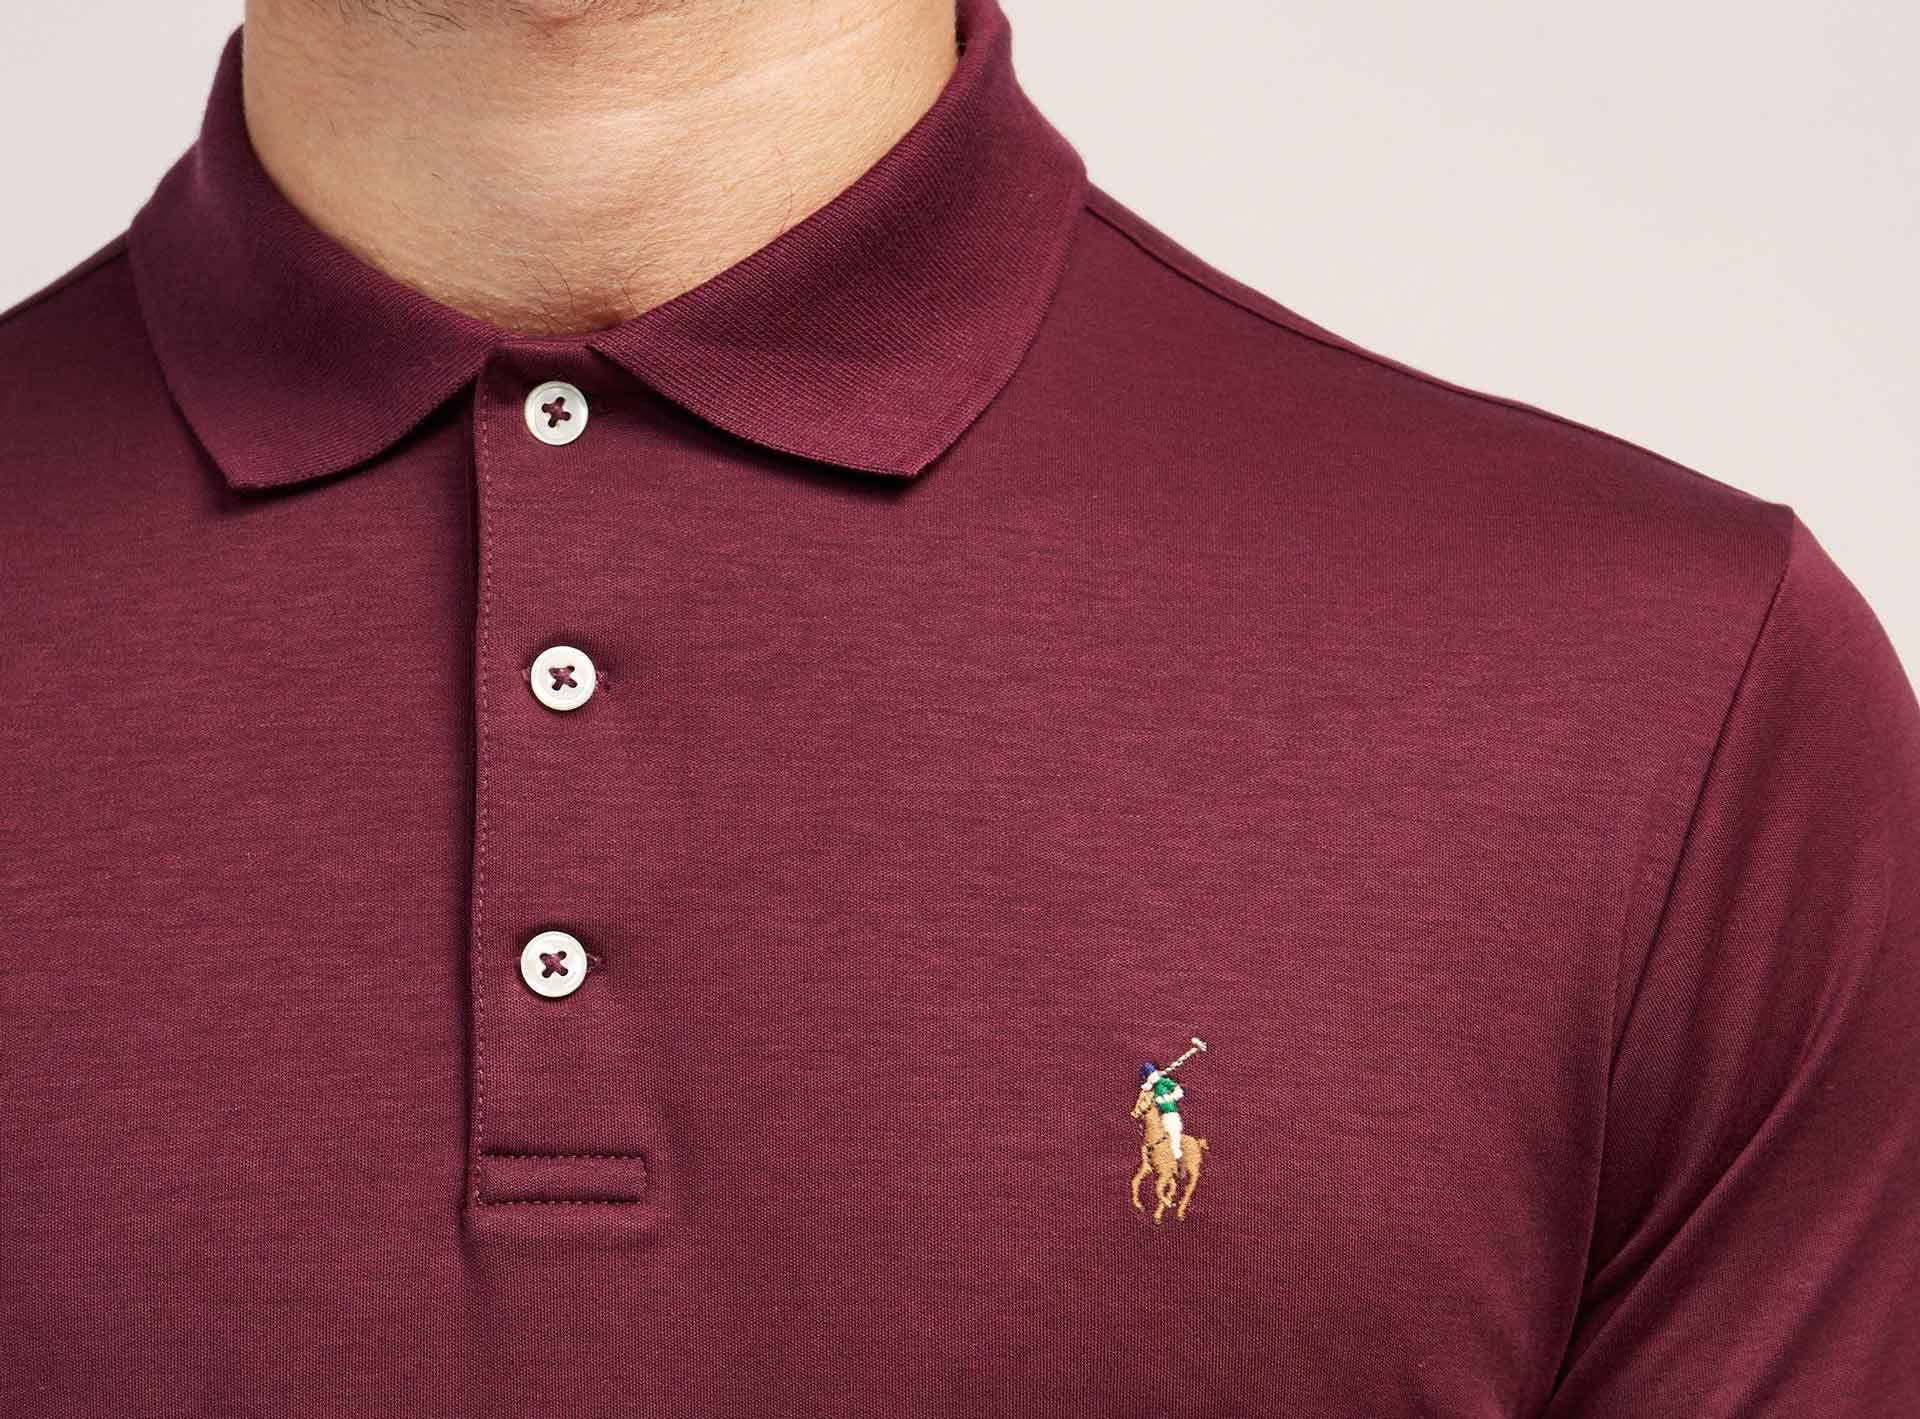 Best Polo Shirts For Men 